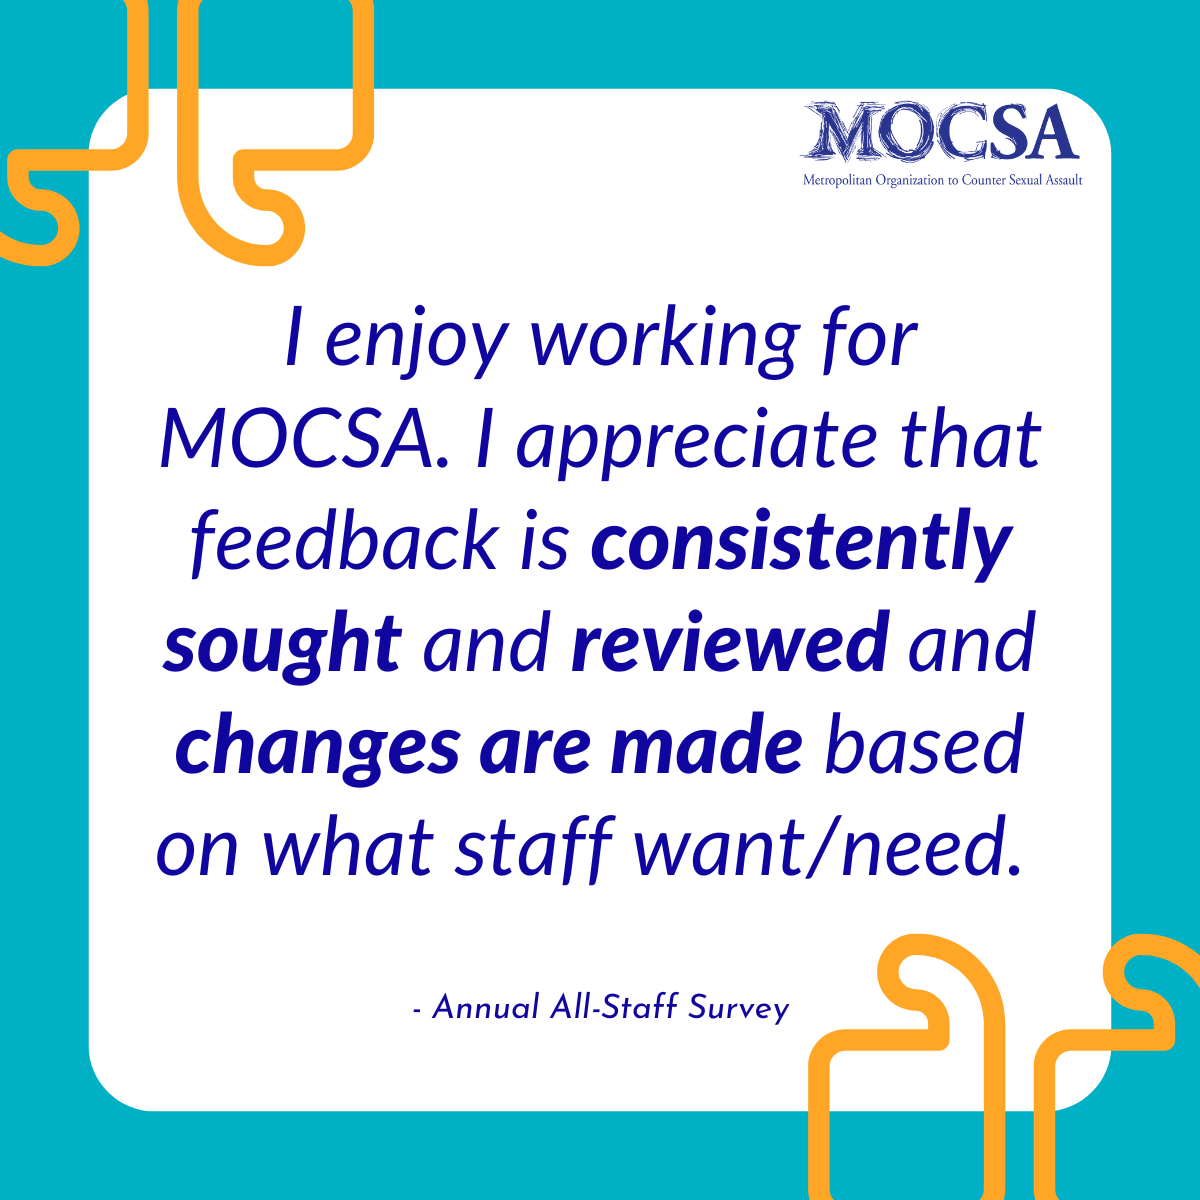 Blue text on white background that reads: I enjoy working for MOCSA. I appreciate that feedback is consistently sought and reviewed and changes are made based on what staff want/need.